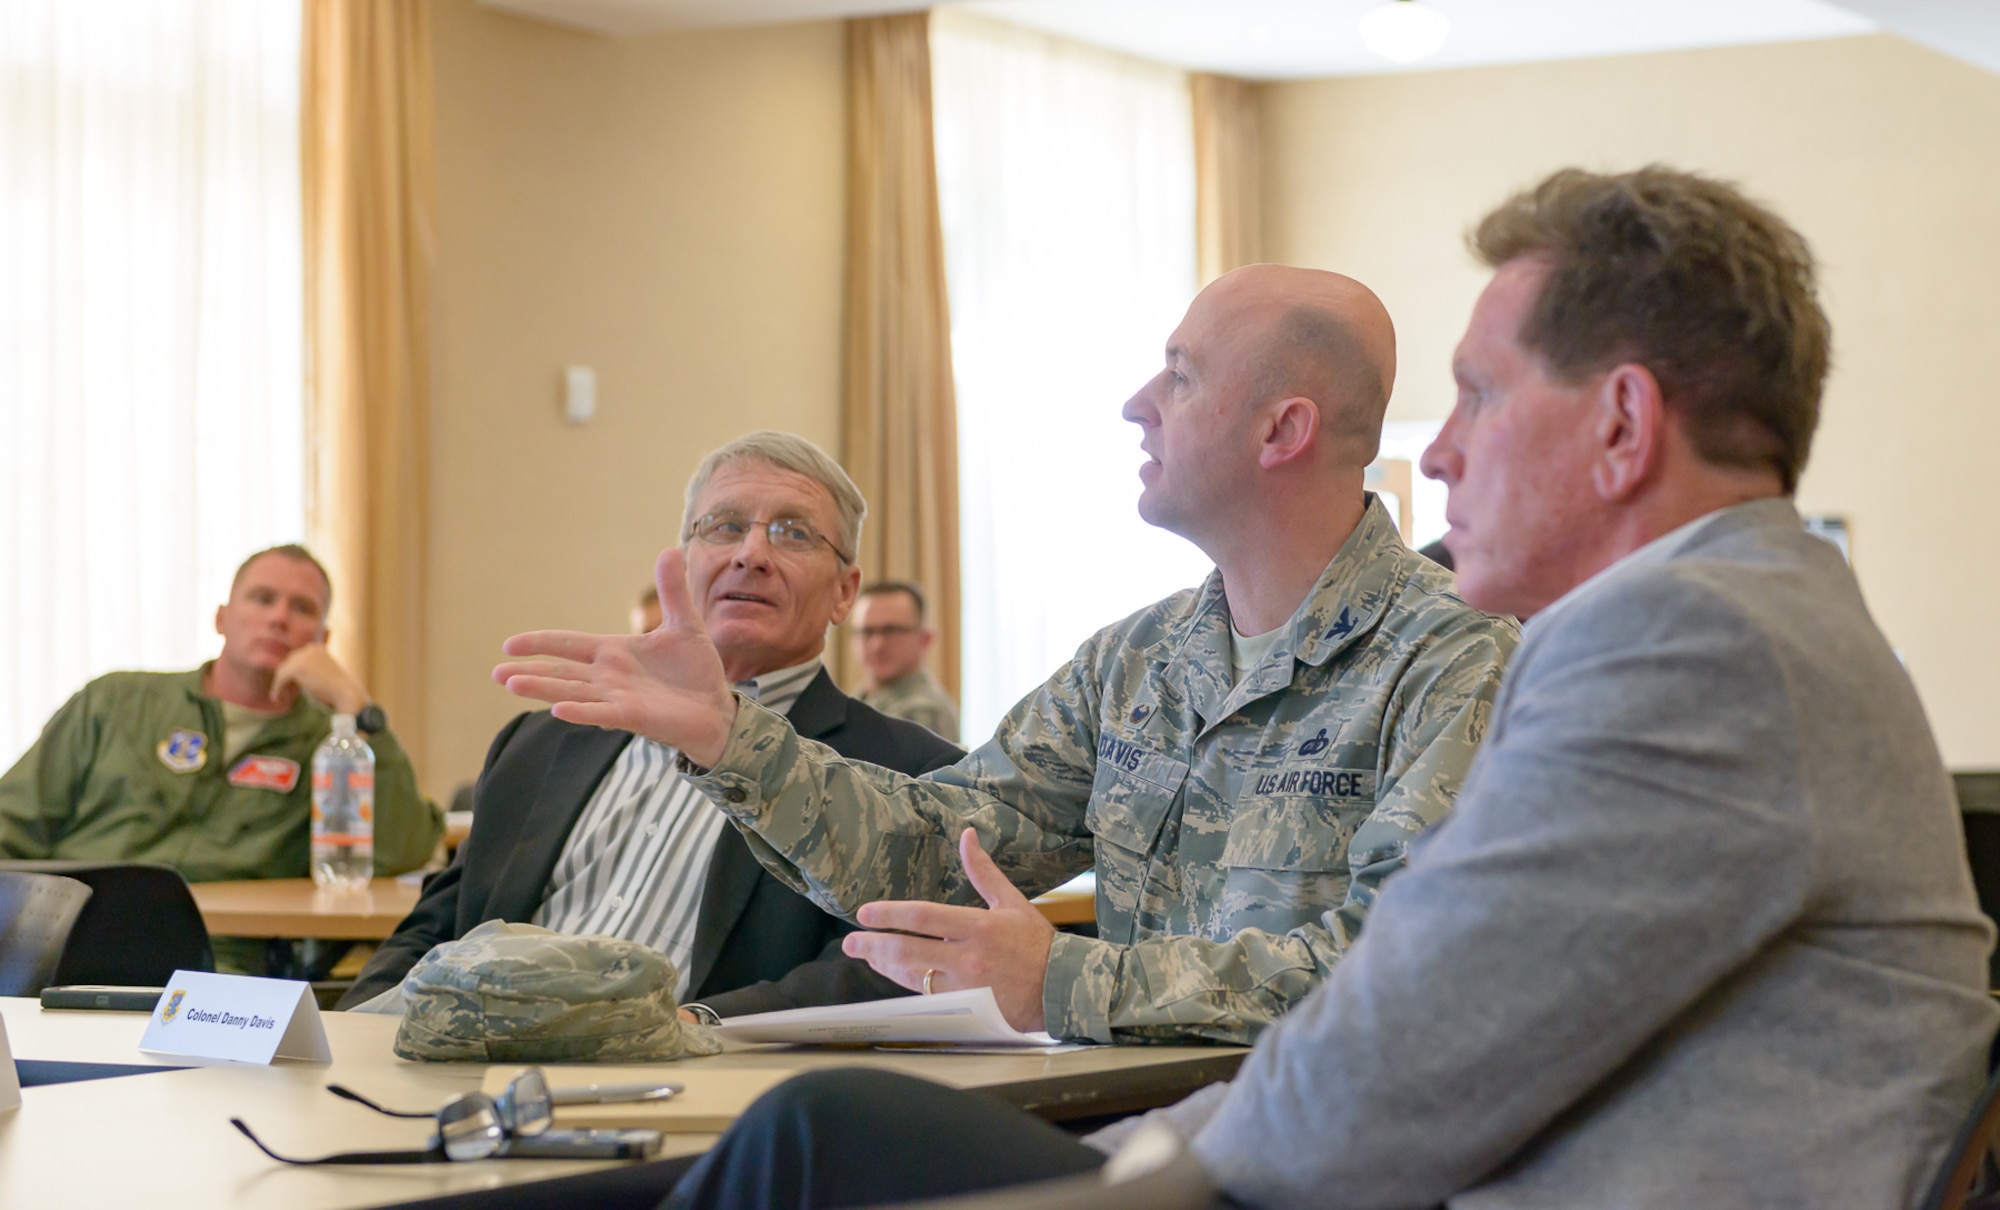 Col. Danny Davis, 81st Mission Support Group commander, engages in discussion with Keesler and community leaders during the Air Force Community Partnership Program Agreements Workshop at the Gulf Park Campus of The University of Southern Mississippi Oct. 25, 2017, Long Beach, Mississippi. The program is part of a larger Air Force Public-Public, Public-Private (P4) initiative to encourage installations and local communities to combine or improve resources or operating processes. Mississippi representatives from state and local communities and various civic leaders attended the event. (U.S. Air Force photo by Andre’ Askew)